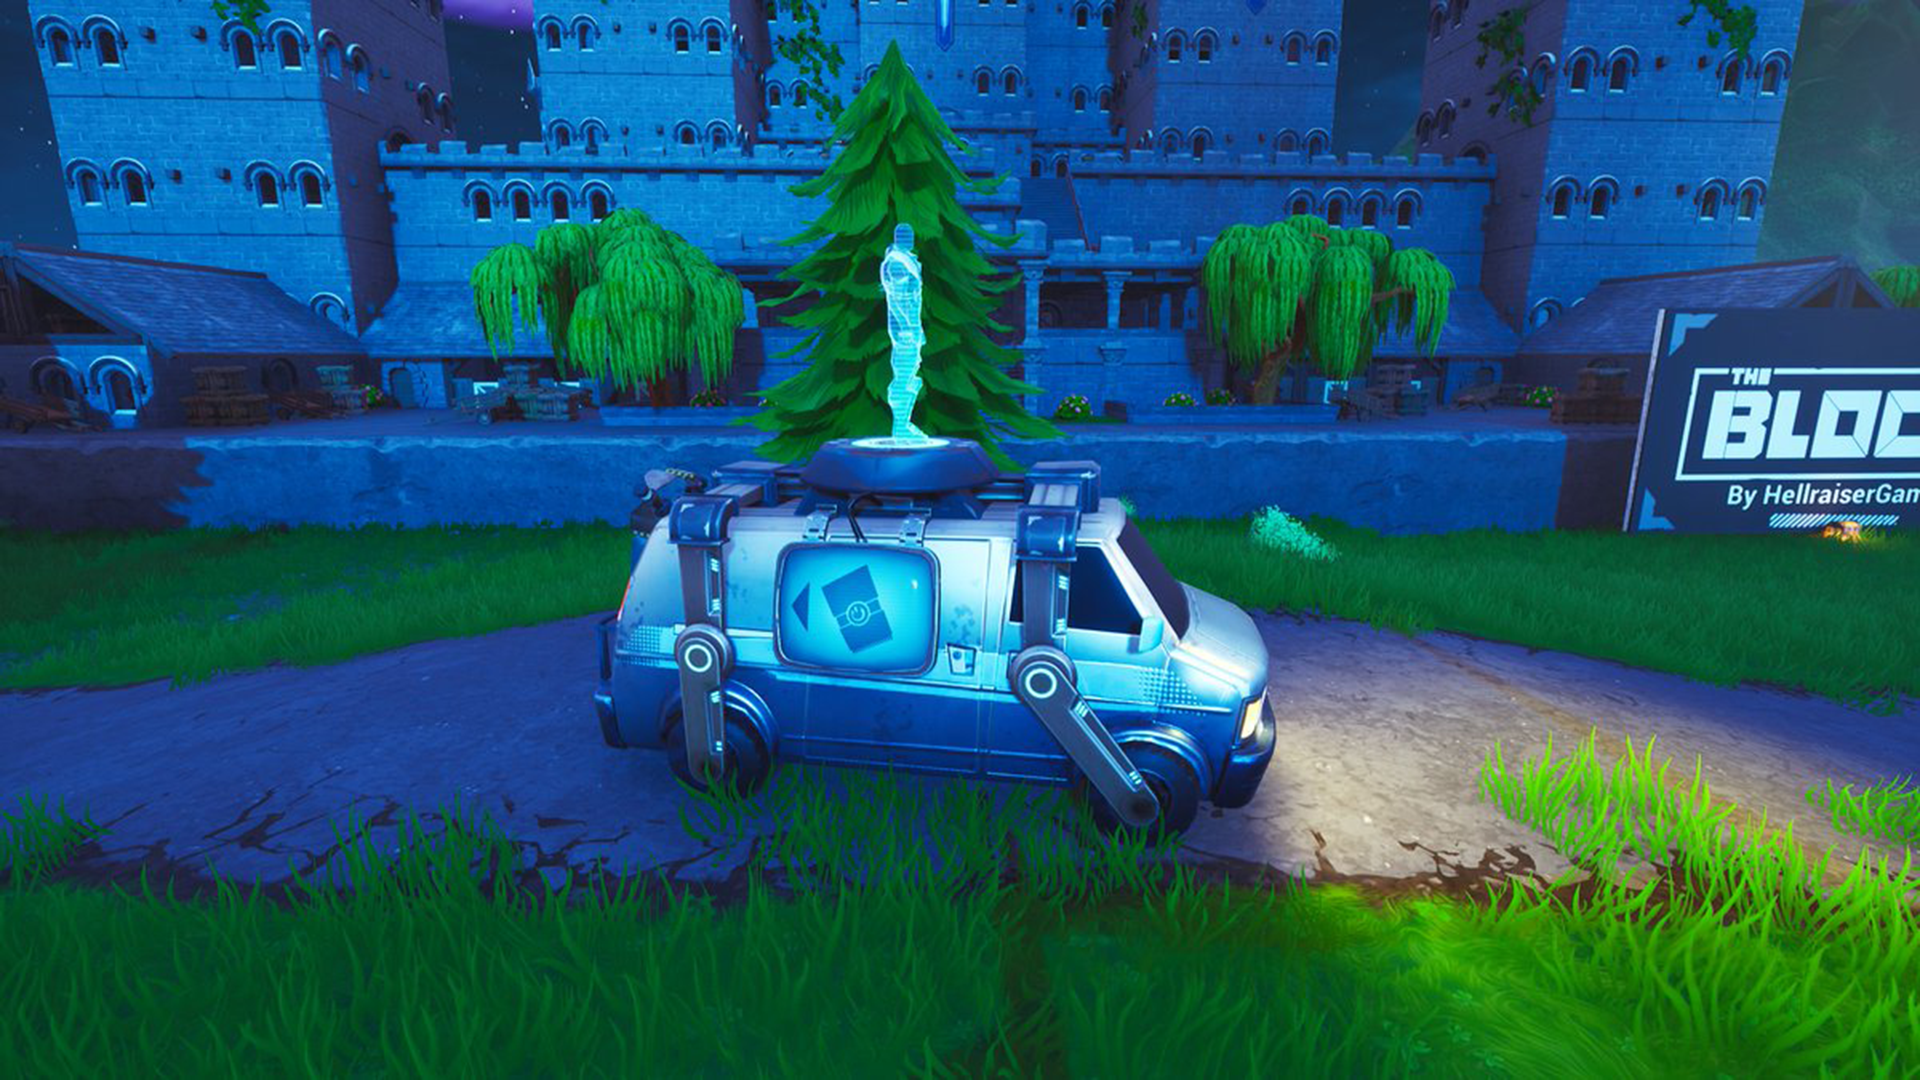 Is Fortnite Stealing Respawn Beacons From Apex Legends With - is fortnite stealing respawn bea!   cons from apex legends with mysterious vans sporting news